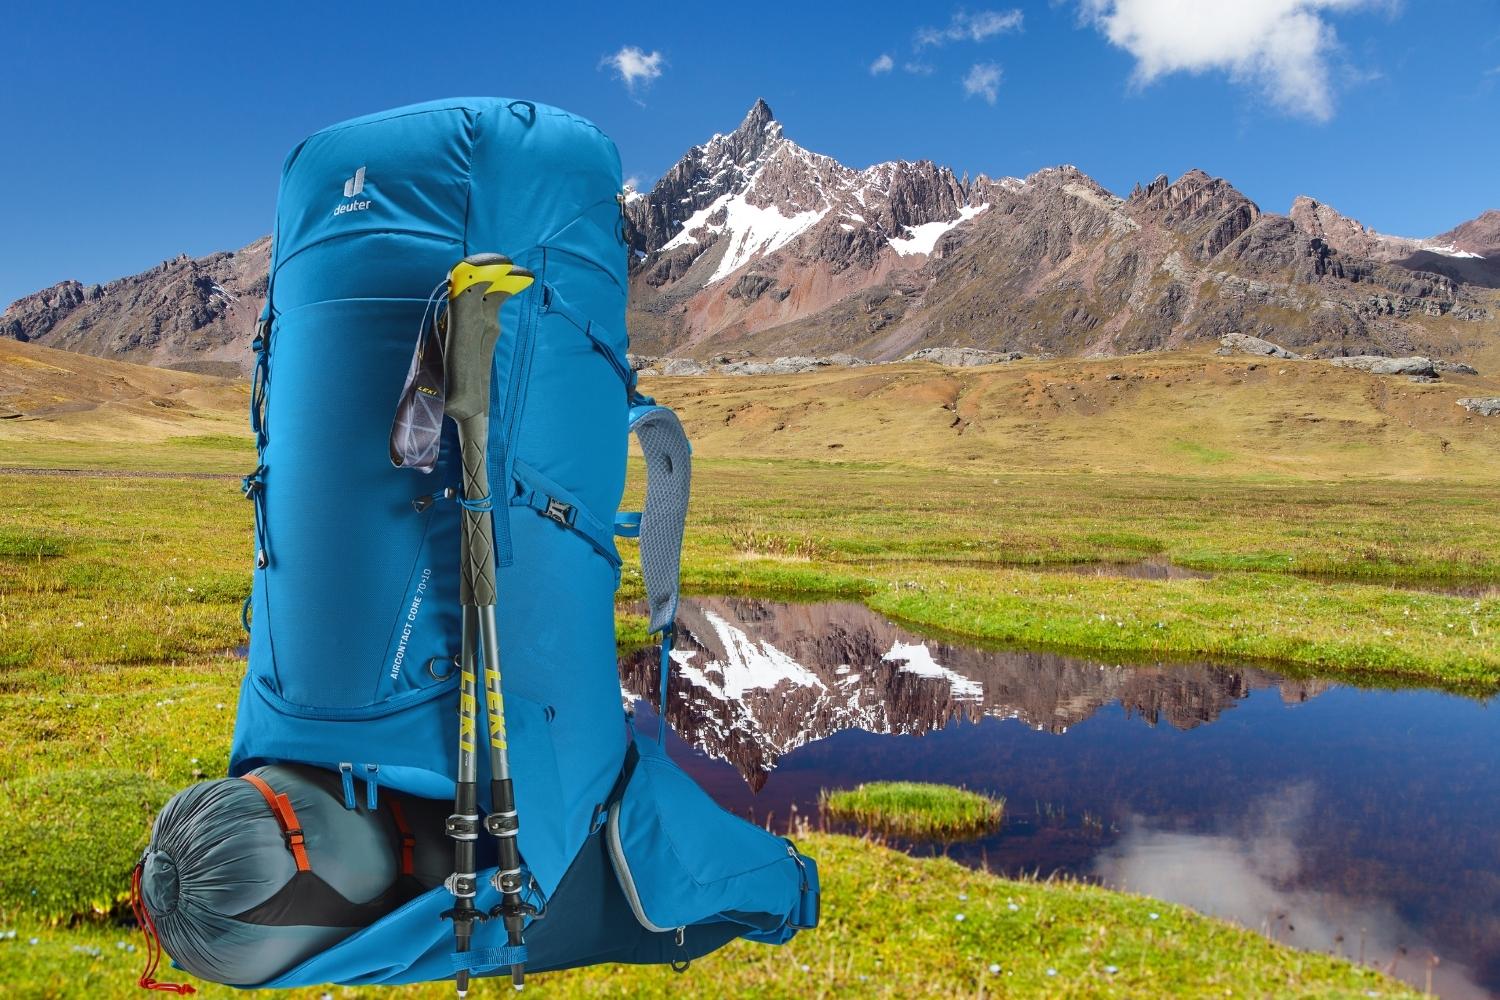 BEST BACKPACK FOR BACKPACKING LONG-TERM: DEUTER AIRCONTACT CORE 70+10